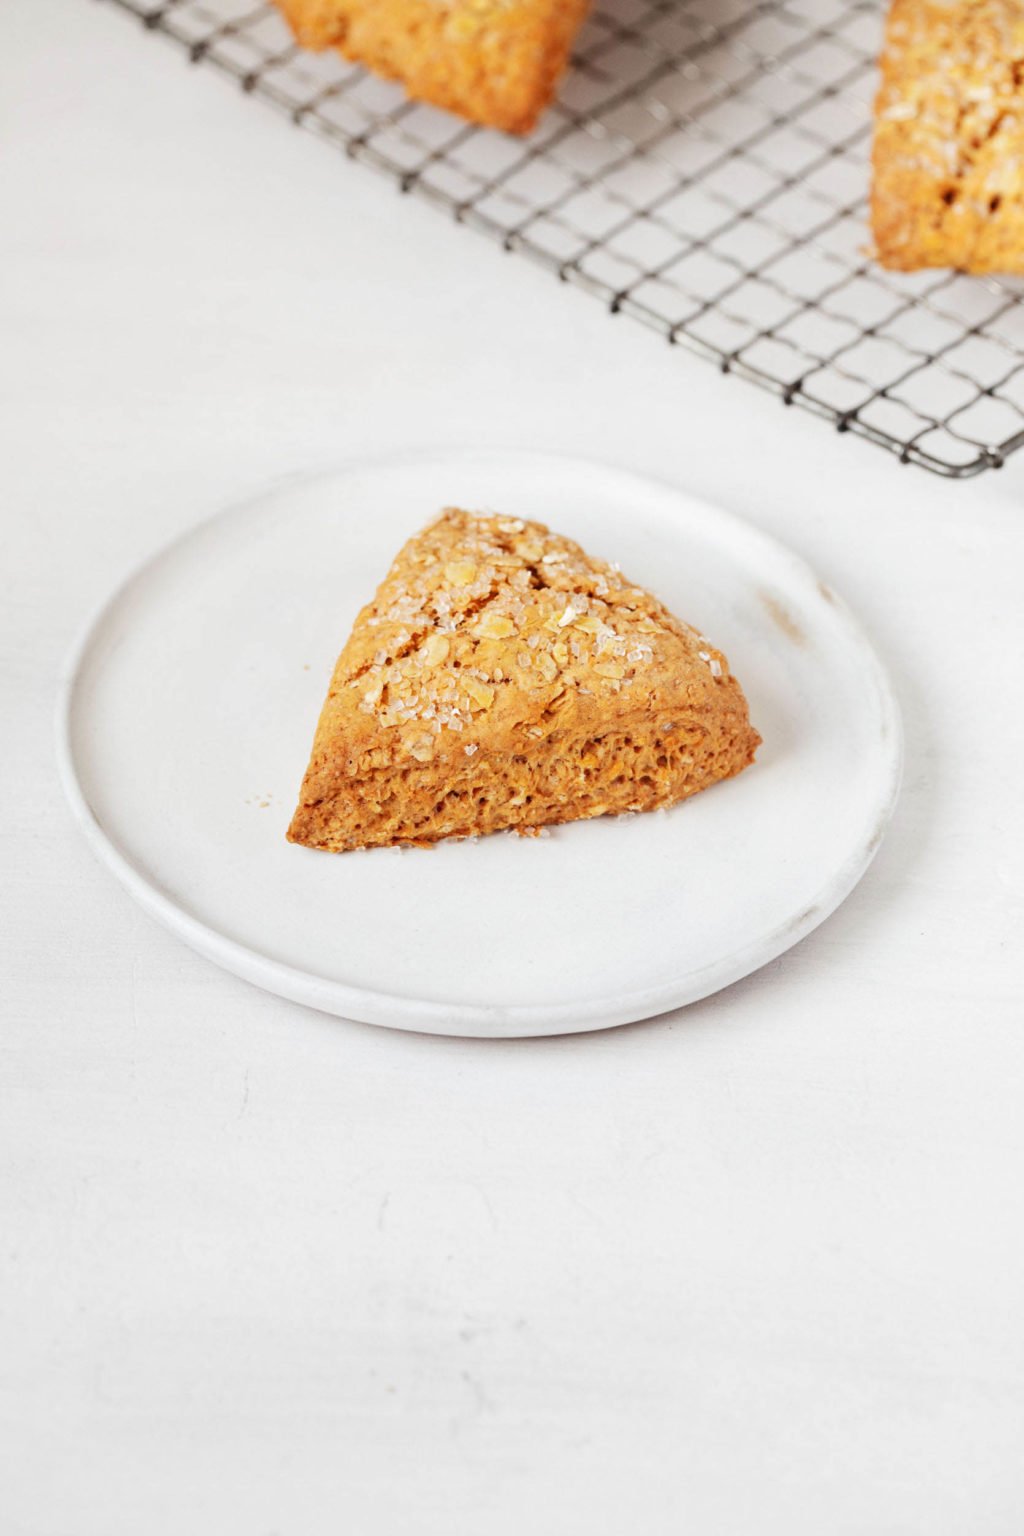 An angled image of a vegan baked good, which rests on a small dessert plate. There's a wire cooling rack in the background.